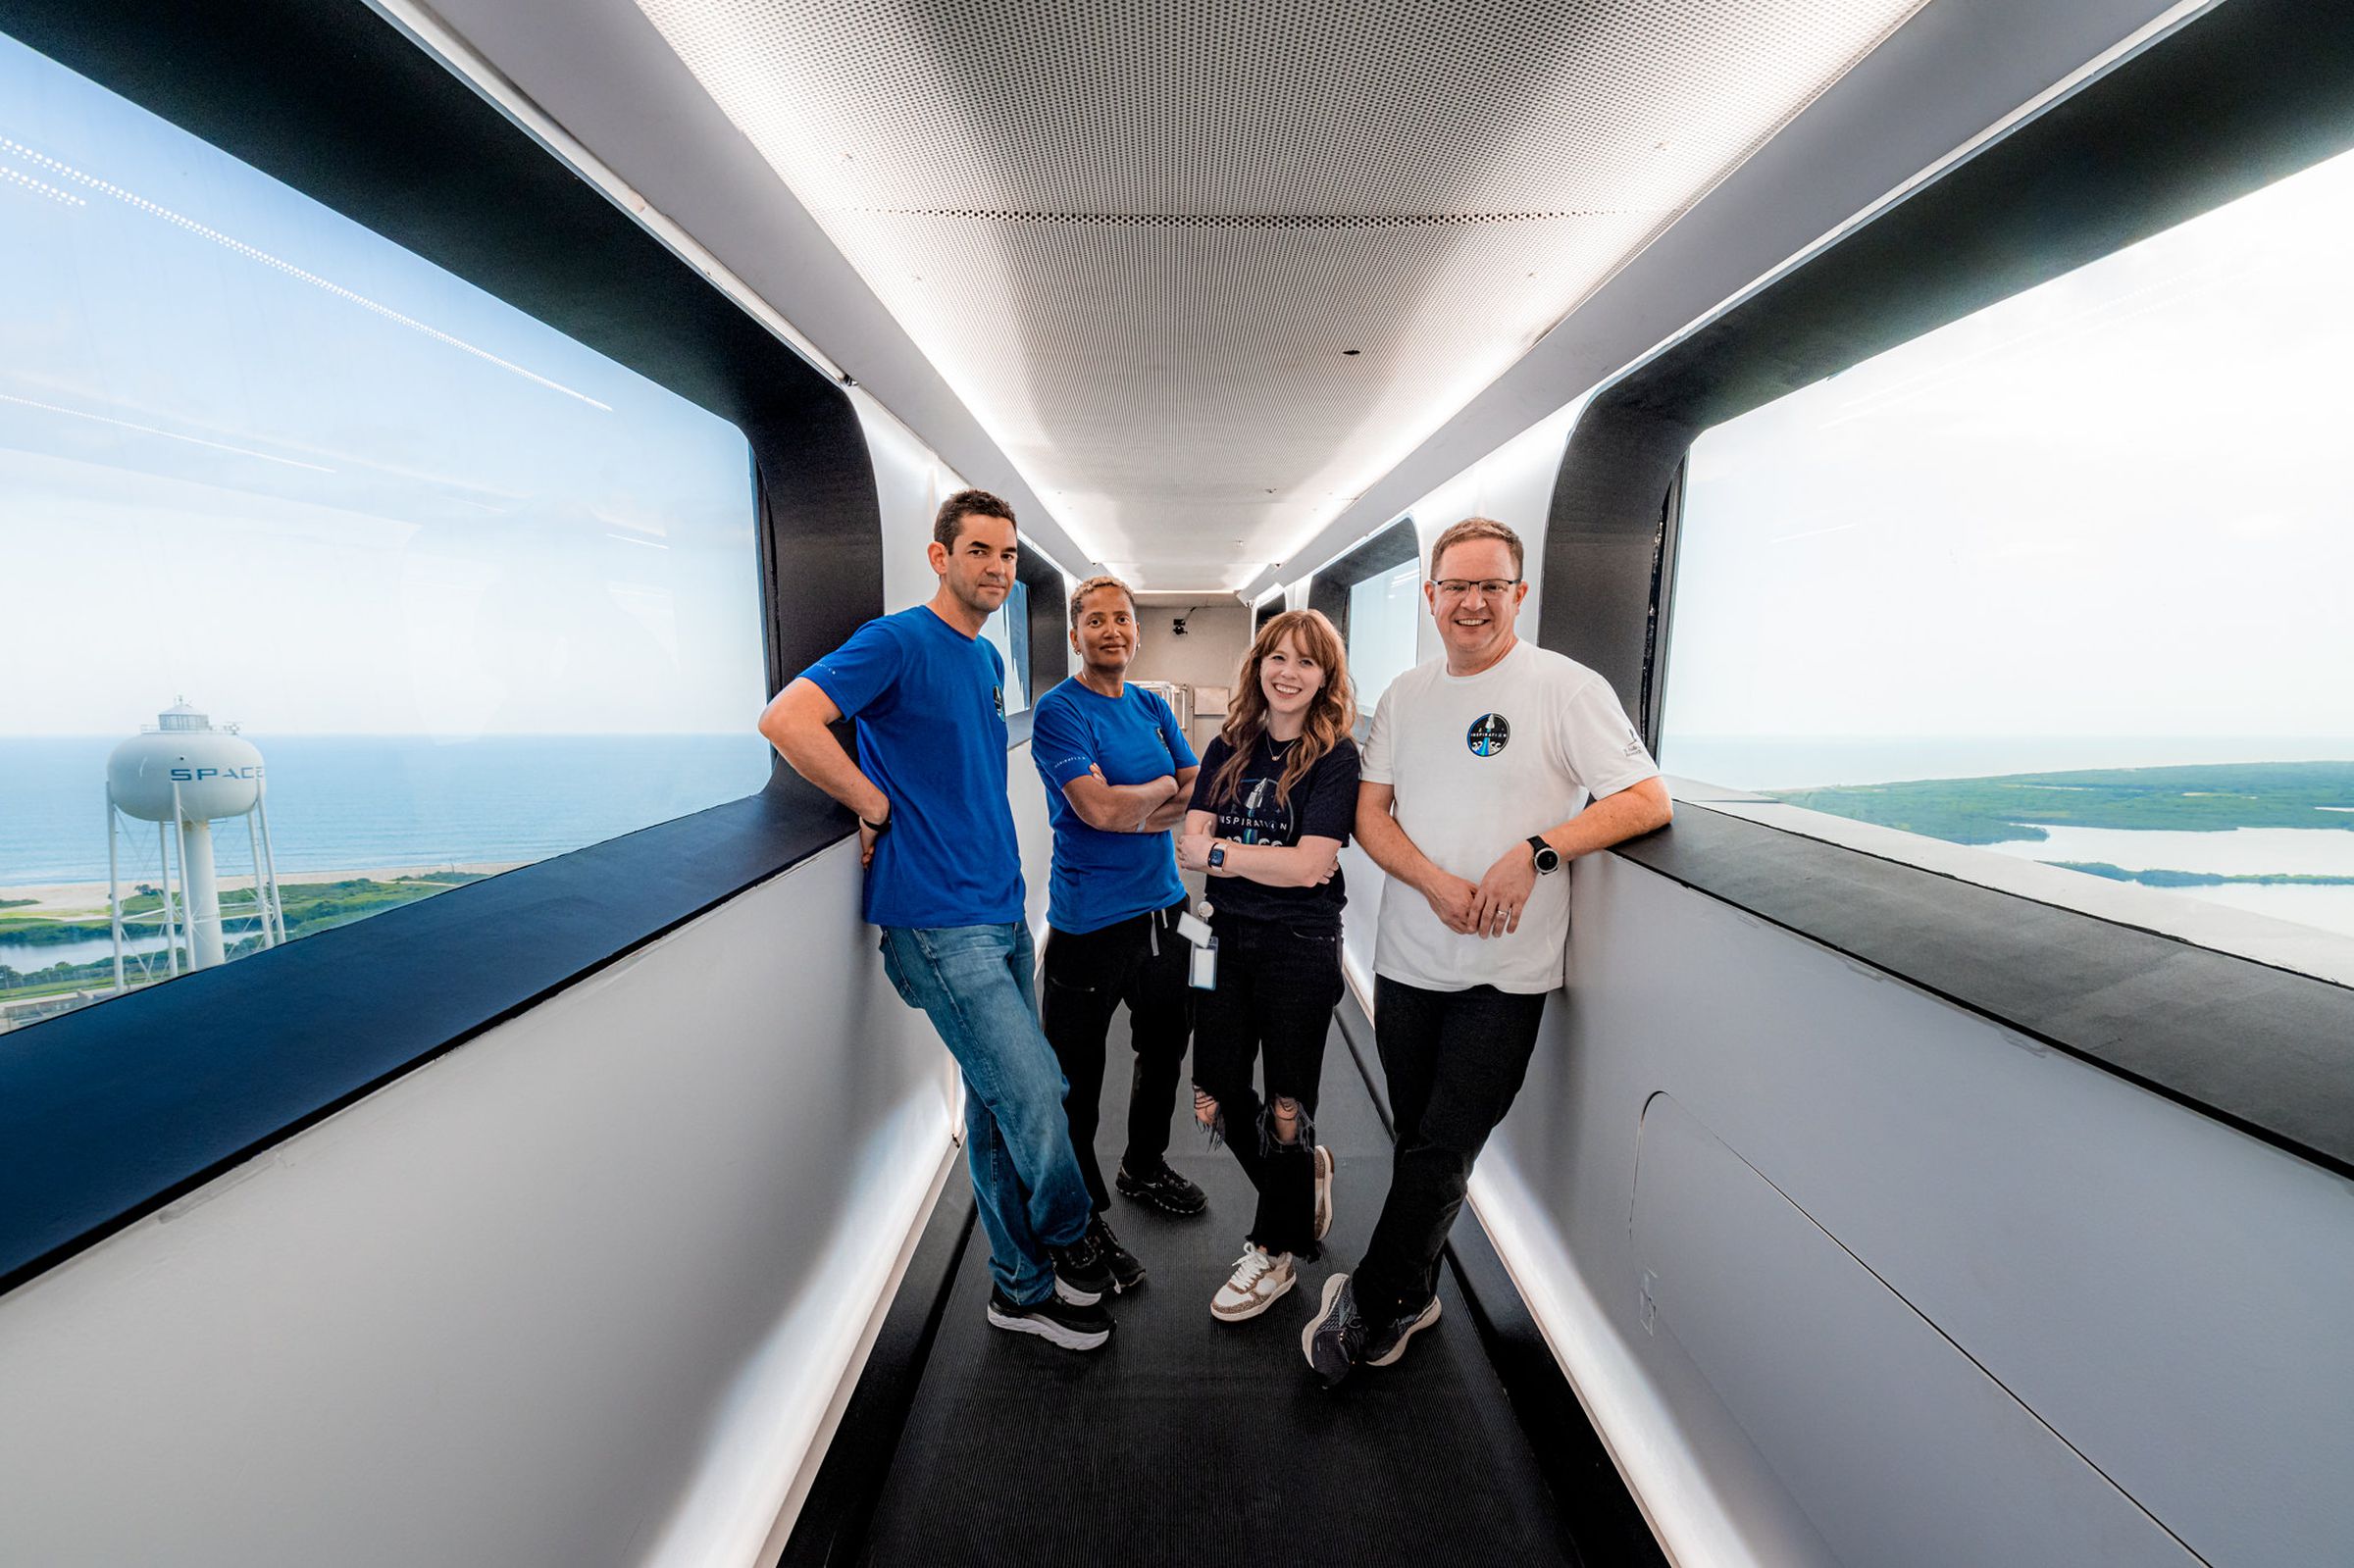 From left to right, Jared Isaacman, Sian Proctor, Hayley Arceneaux, and Christopher Sembroski pose for a photo inside SpaceX’s Crew Access Arm, the bridge passengers use to board Crew Dragon on the launchpad.